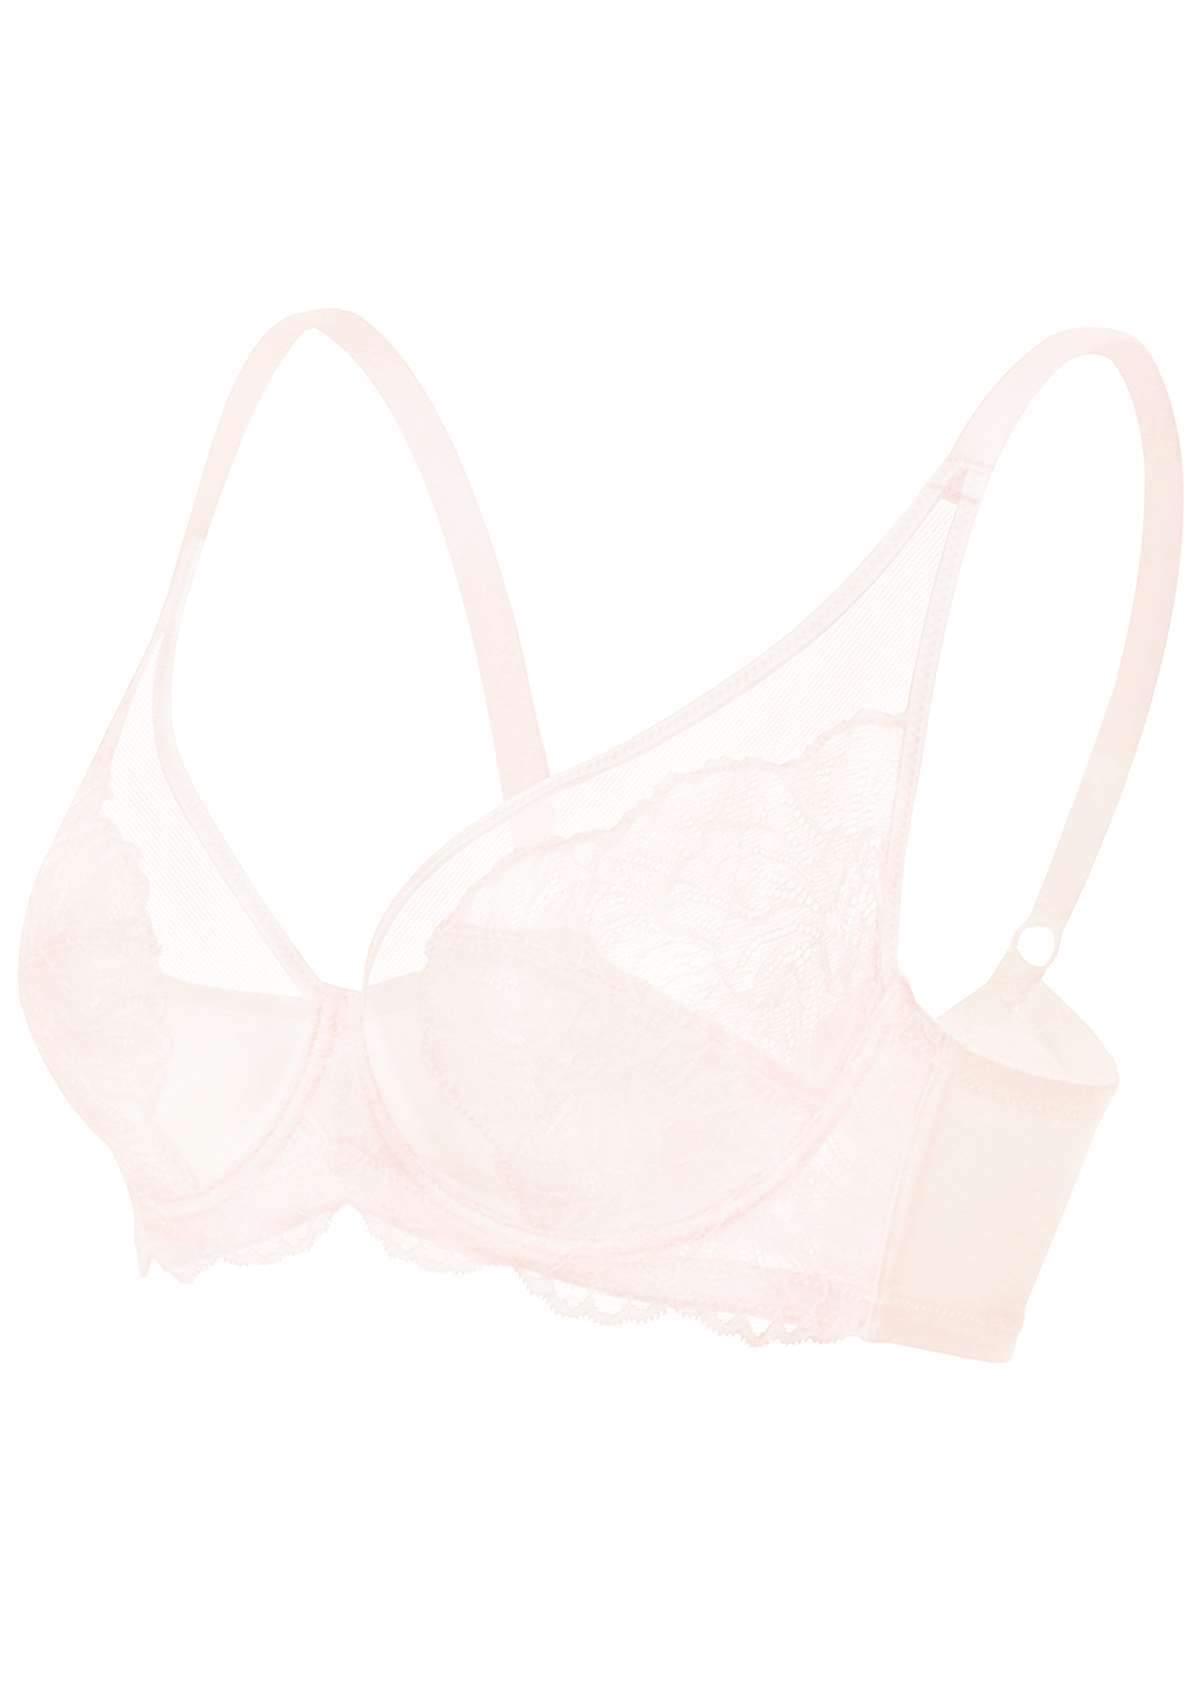 HSIA Blossom Sheer Lace Bra: Comfortable Underwire Bra For Big Busts - White / 38 / I